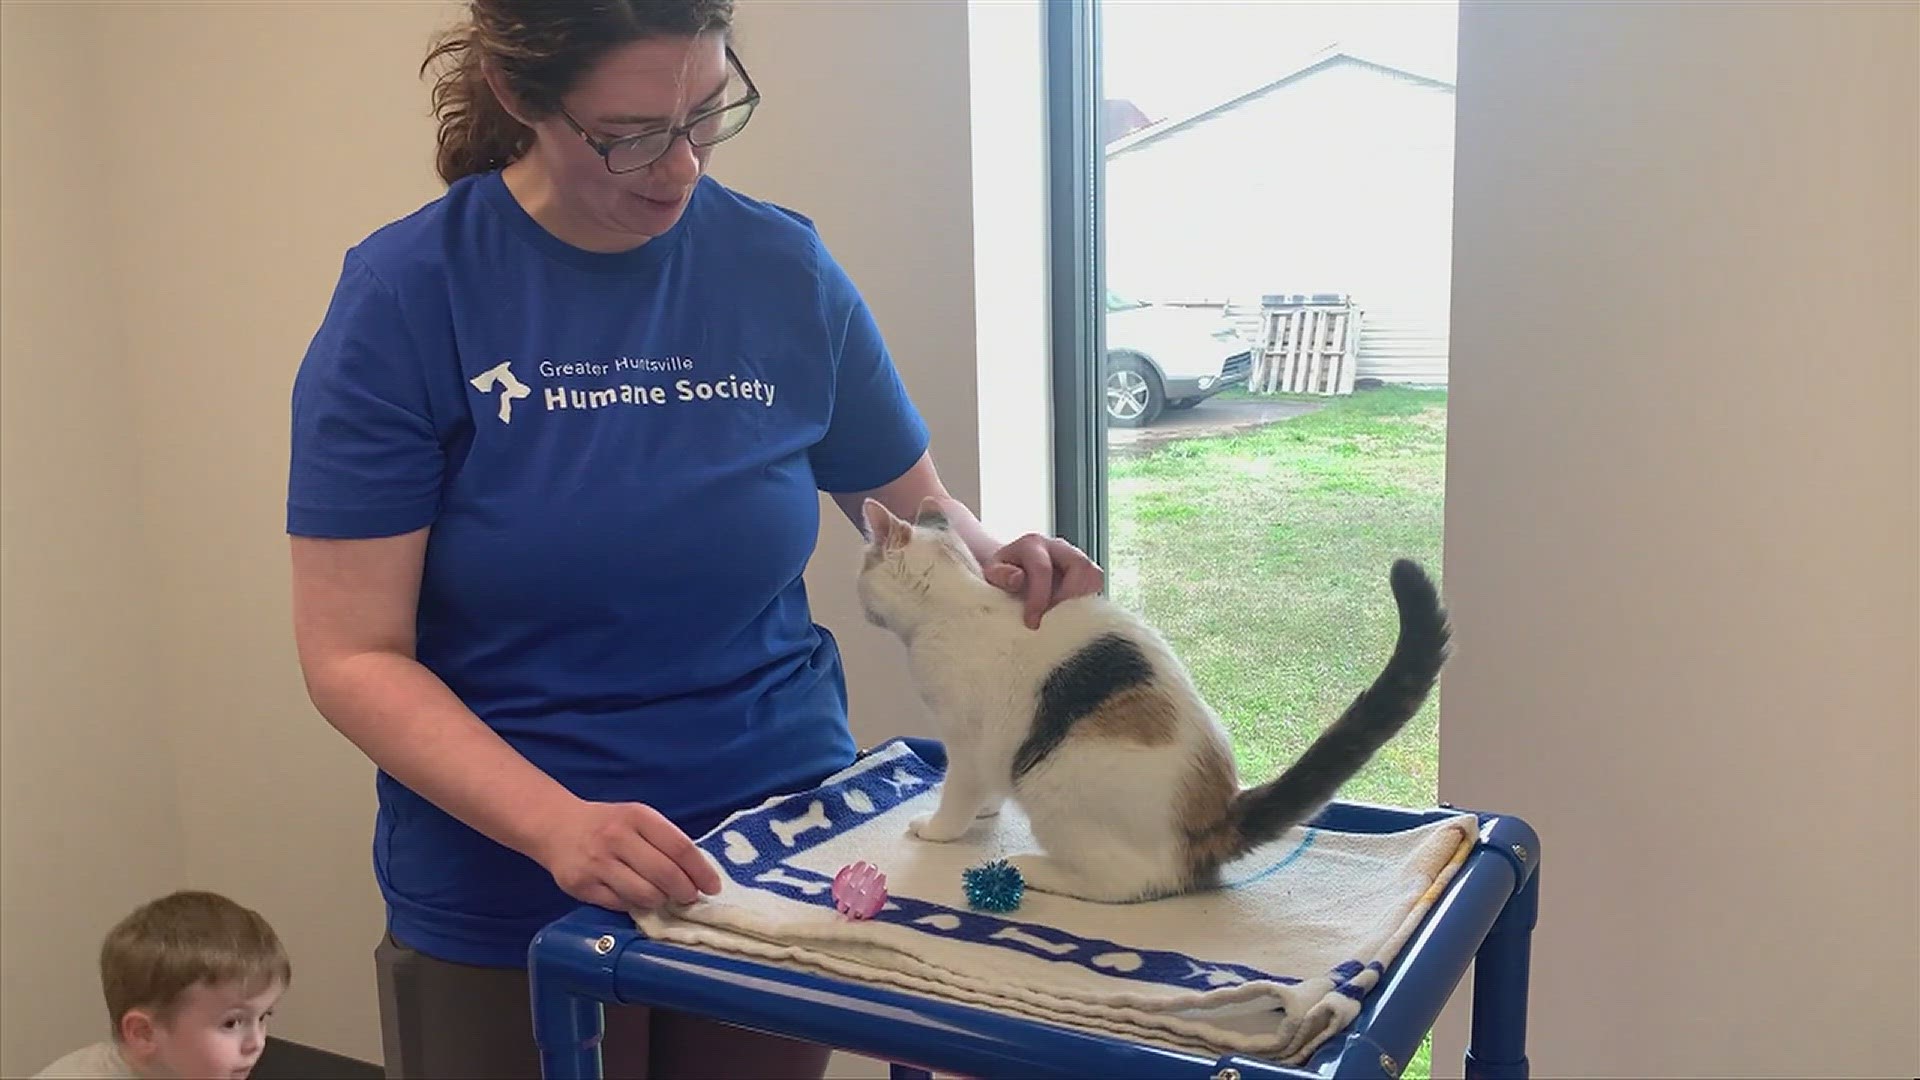 Greater Huntsville Humane Society's adoption and resource center specializes in FIV+ and leukemia-positive felines.